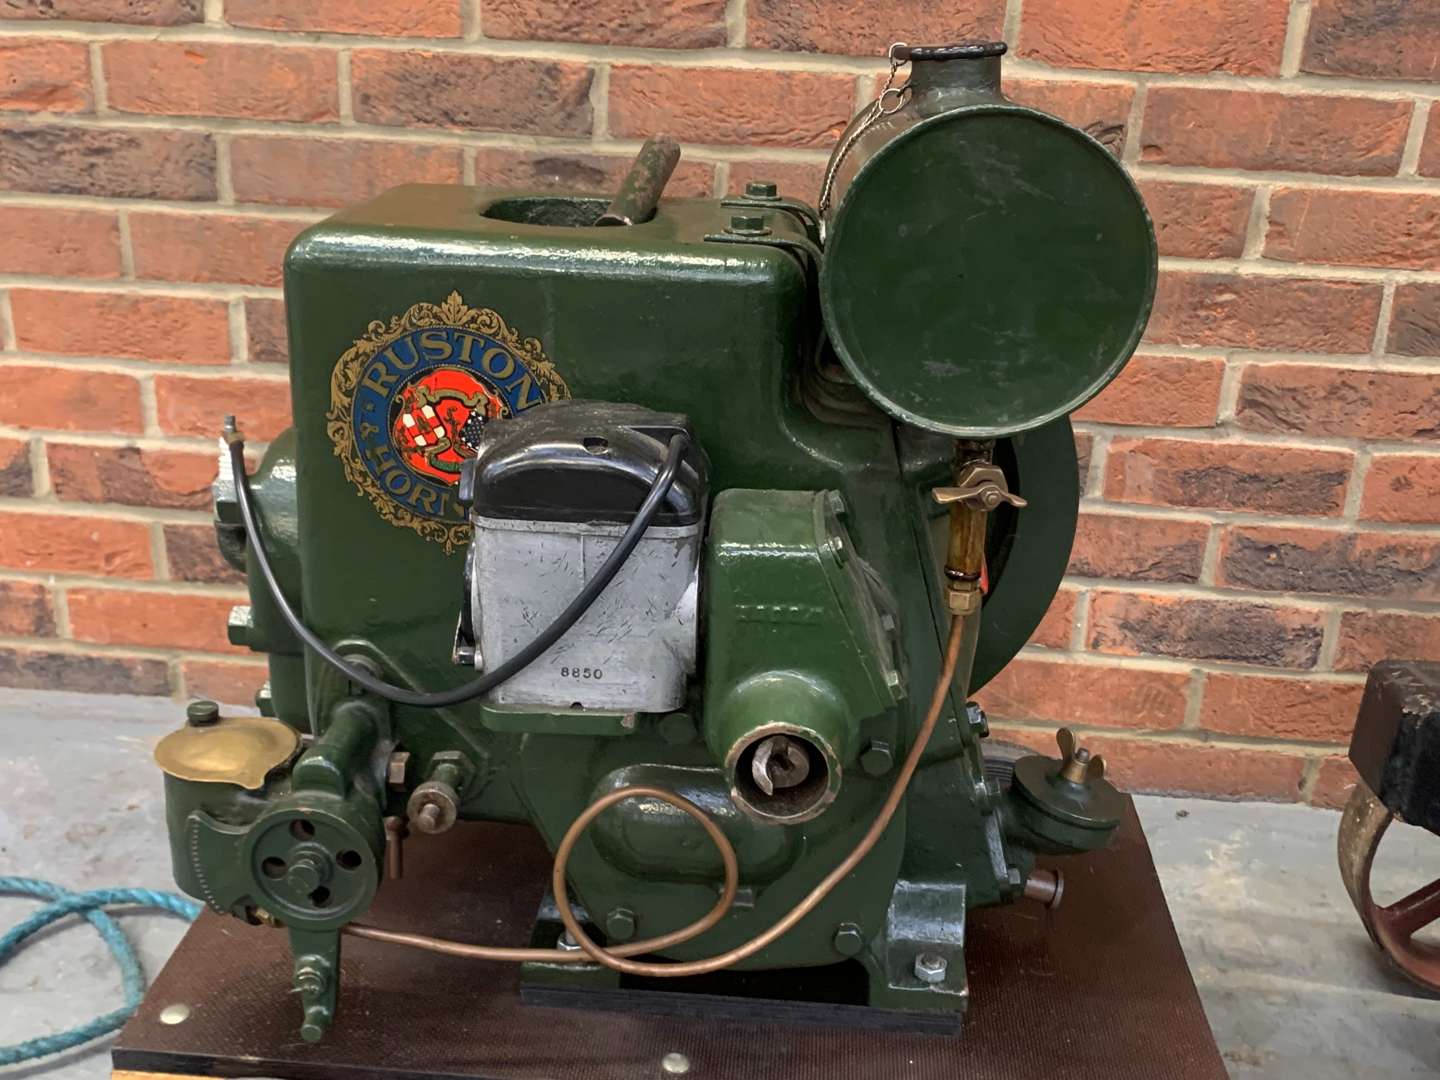 <p>Stationary Engine and two Ruston Hornsby Belt Driven Pumps (3)</p>